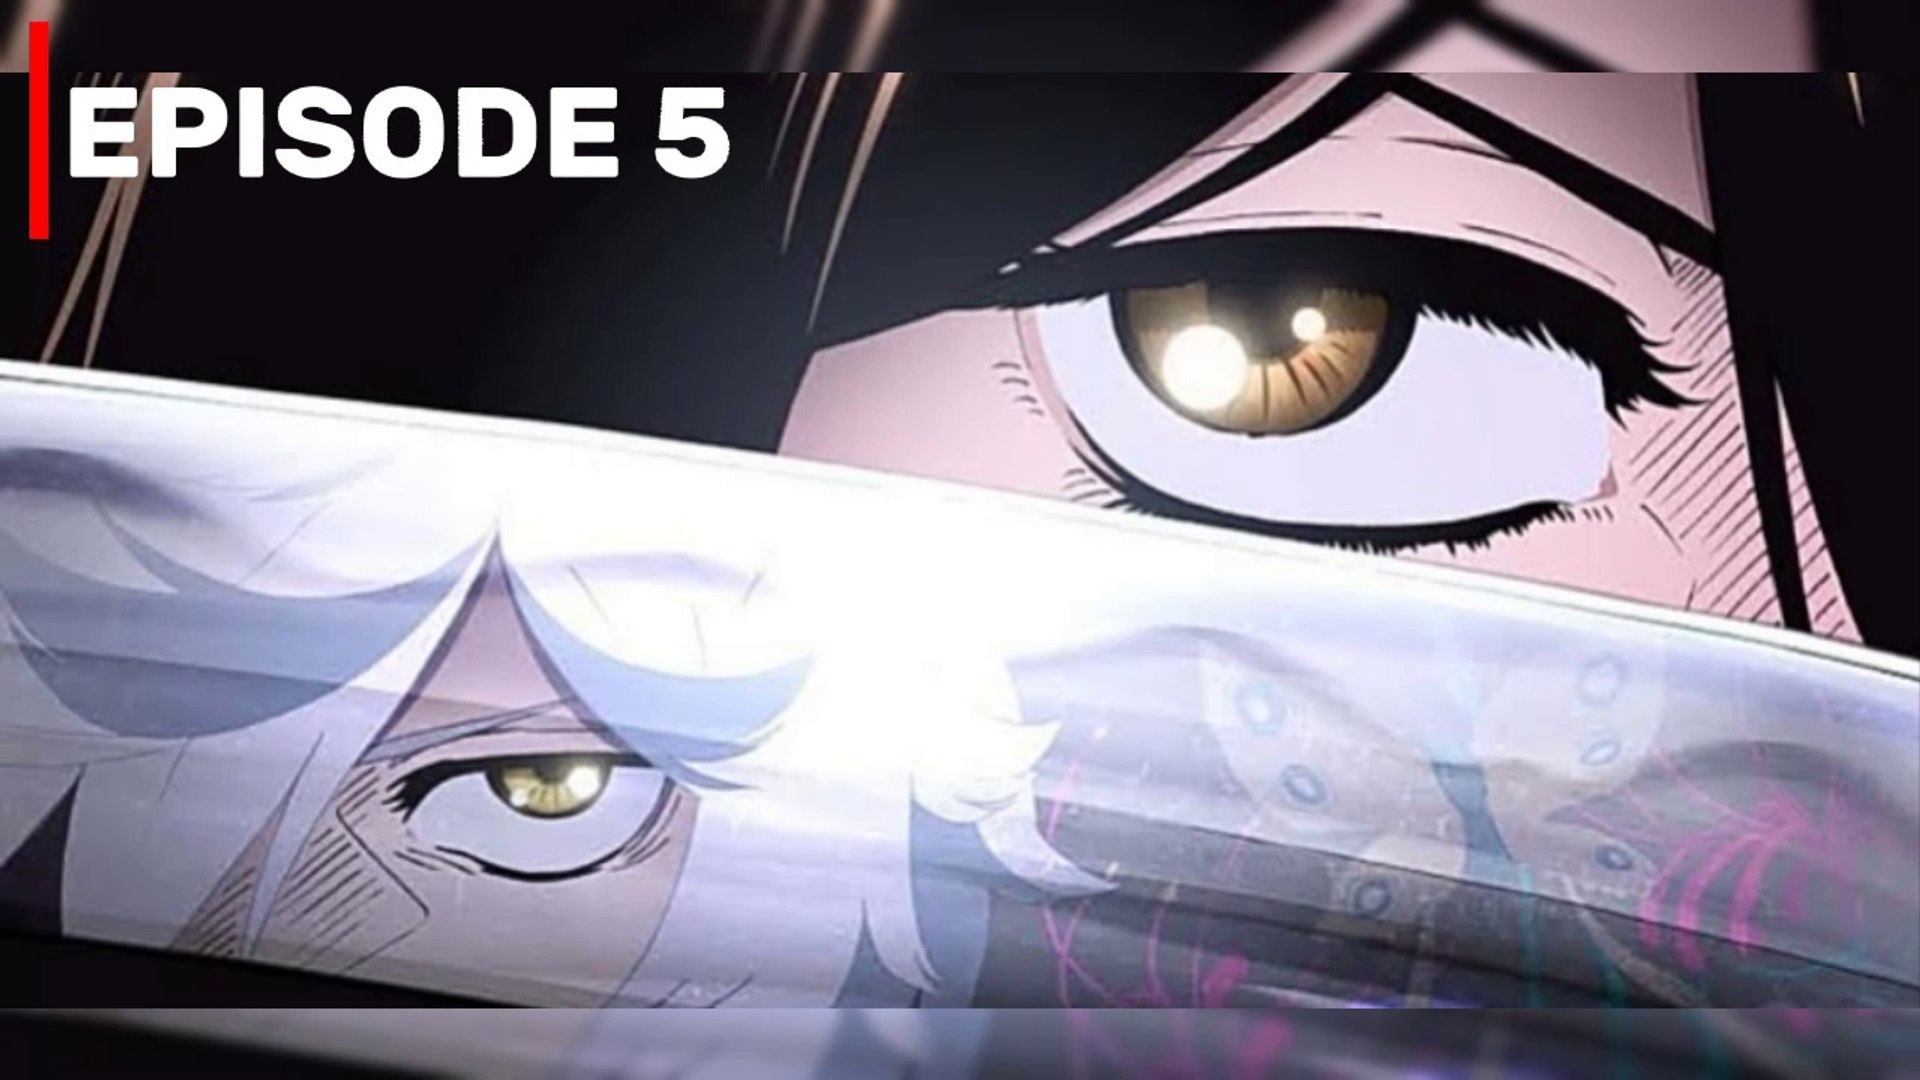 Blue lock Episode - 1 Sub Hindi . anime in india,anime in hindi,indian  anime,anime,anime india,hindi anime,indian anime is bad,indian hate  anime,indian anime kirtichow,india,indian references in anime  (hindi),indian characters in anime (hindi) 